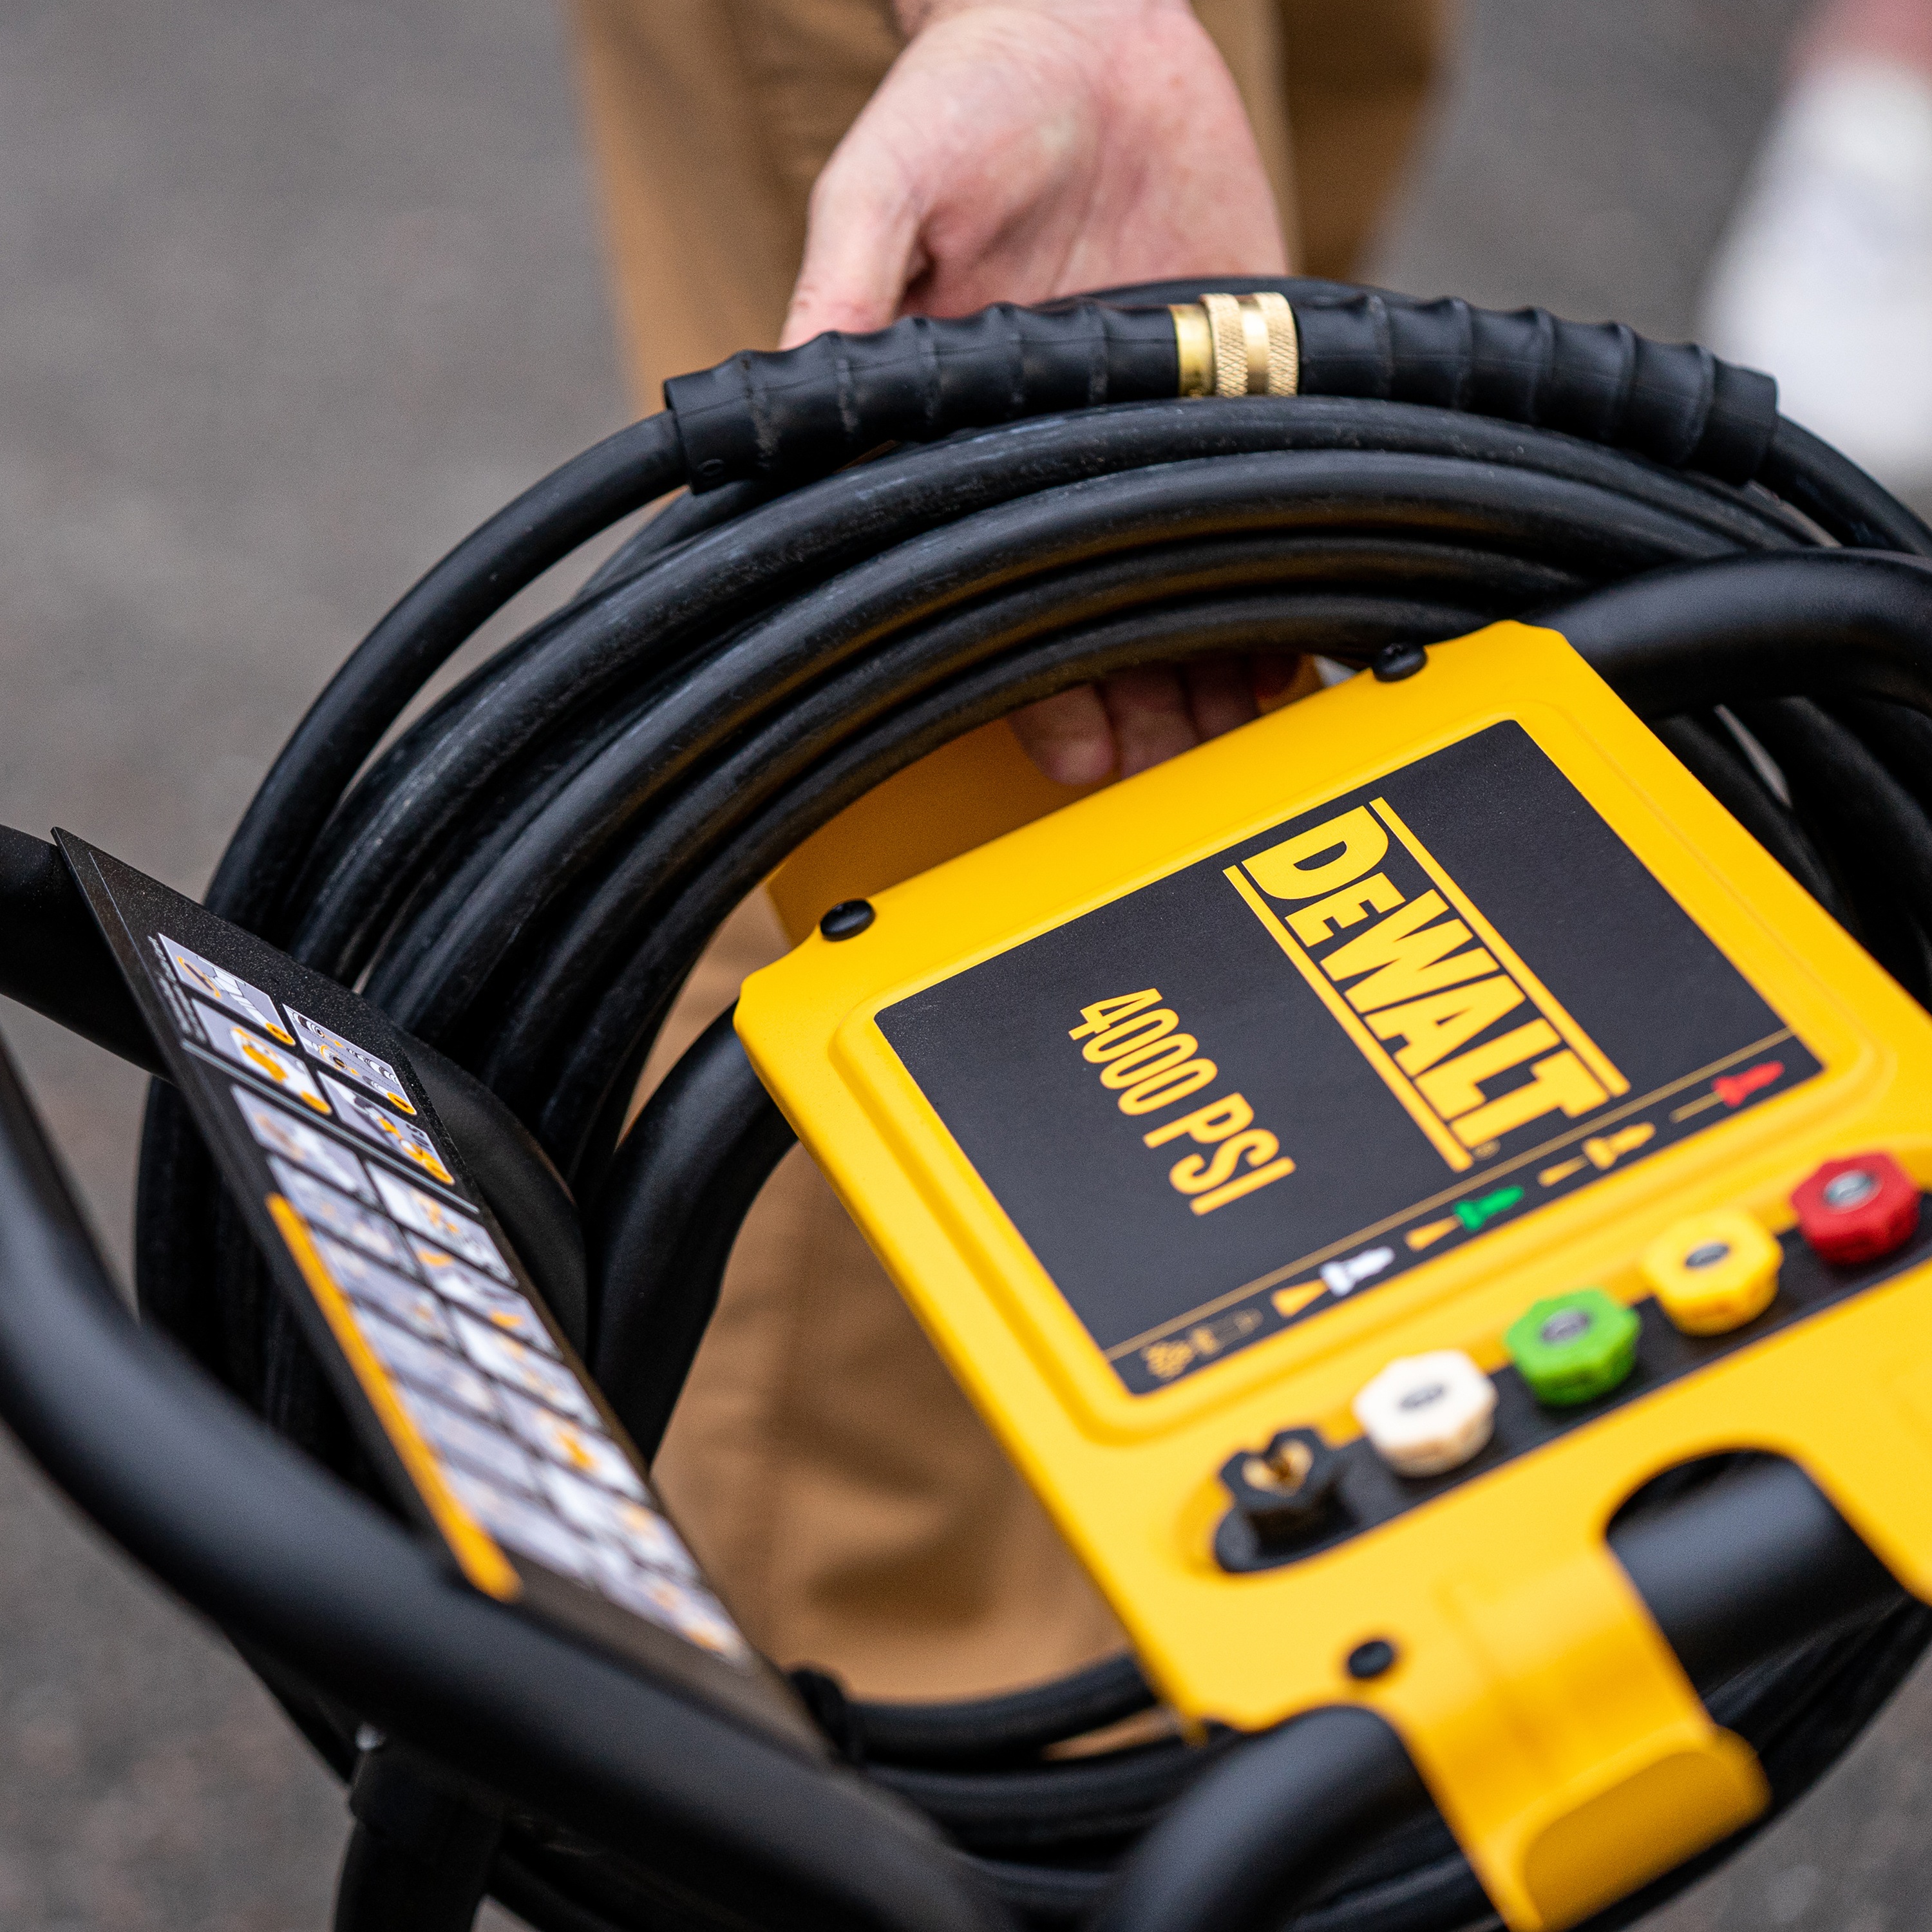 DEWALT - 4000 PSI at 35 GPM Cold Water Gas Pressure Washer Powered by Honda with Triplex Pump - DXPW4035